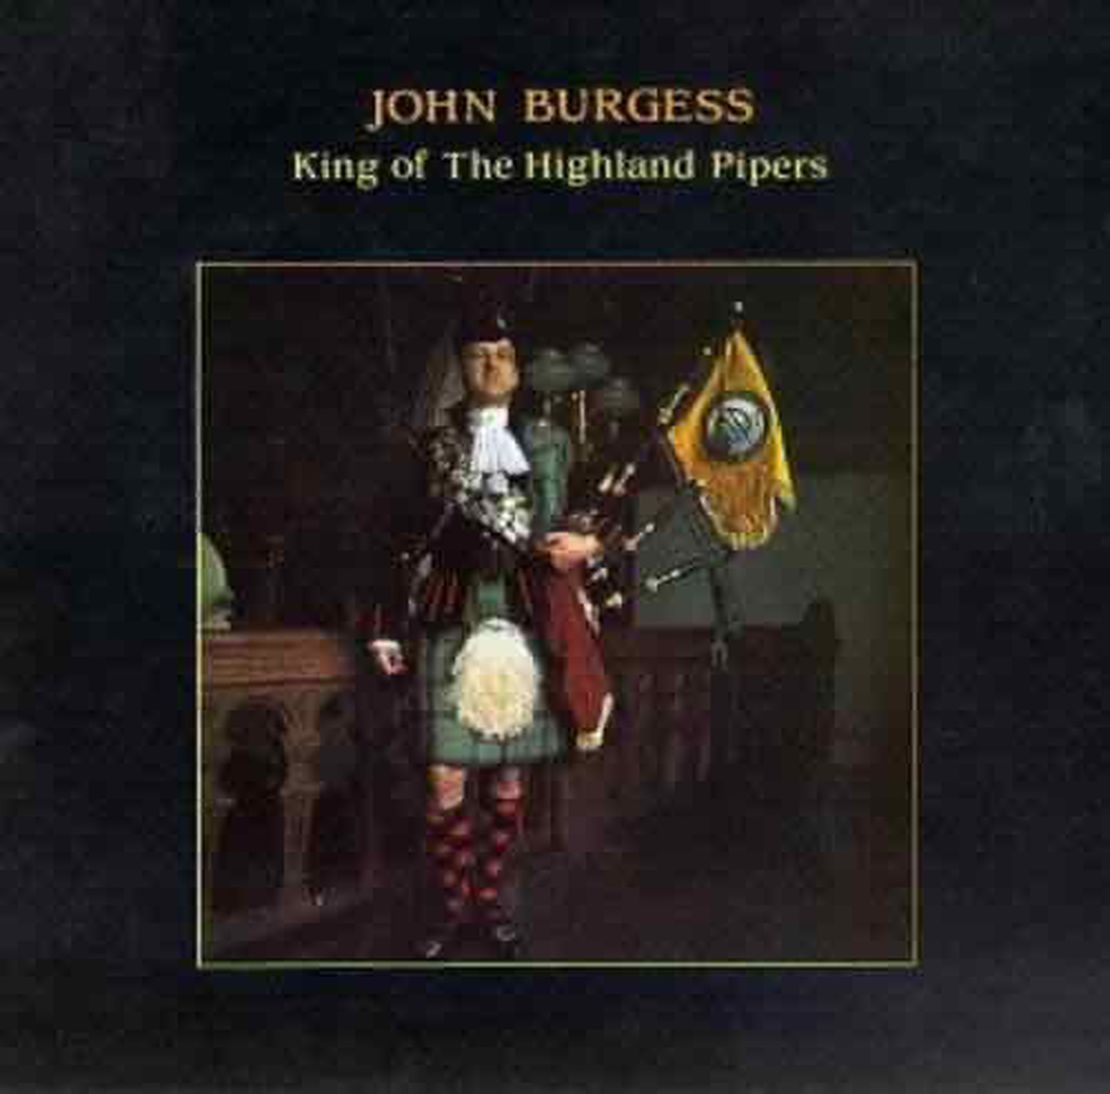 John Davie Burgess, King of the Highland Pipers, died at age 71.